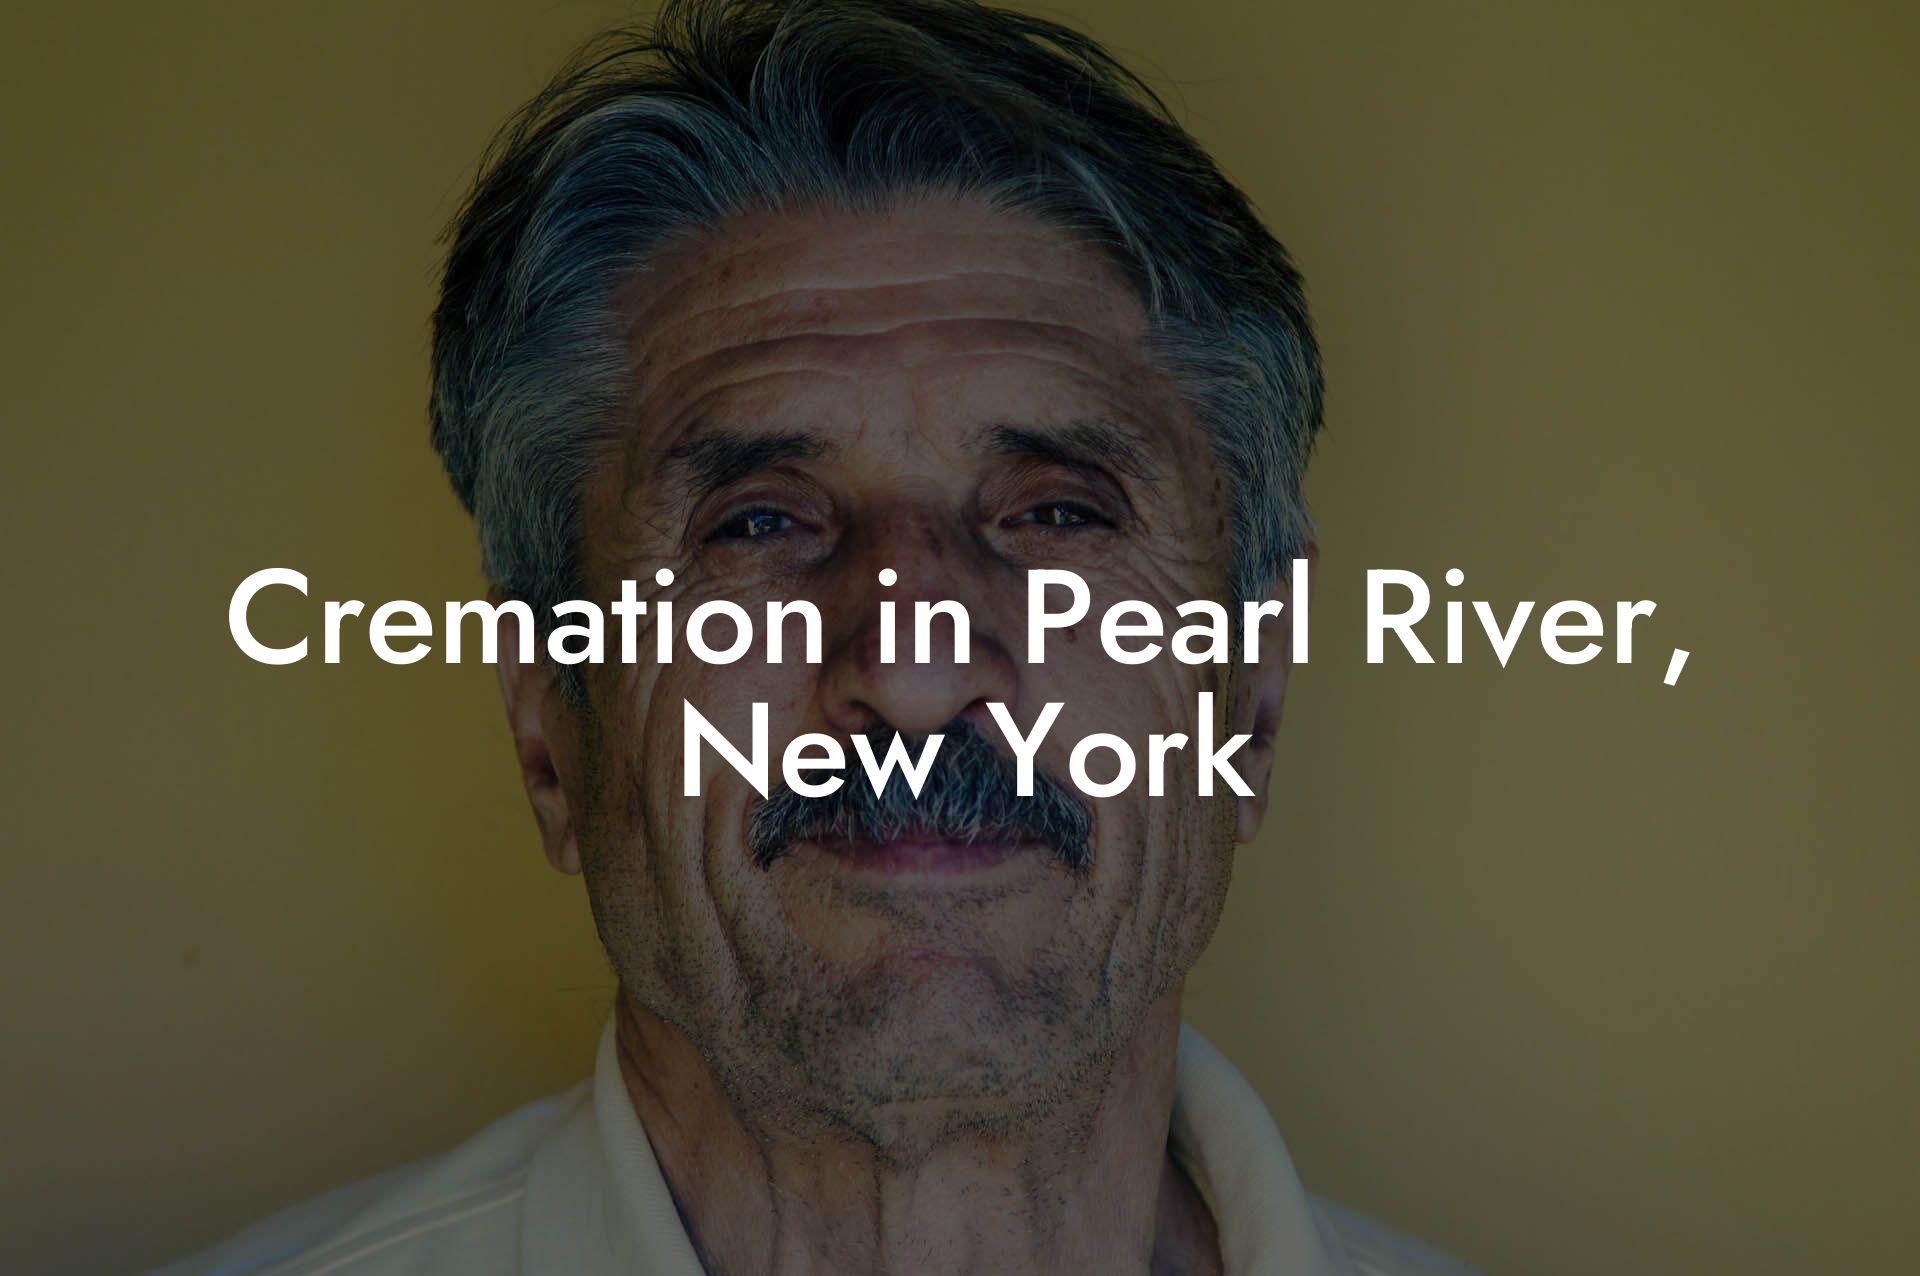 Cremation in Pearl River, New York